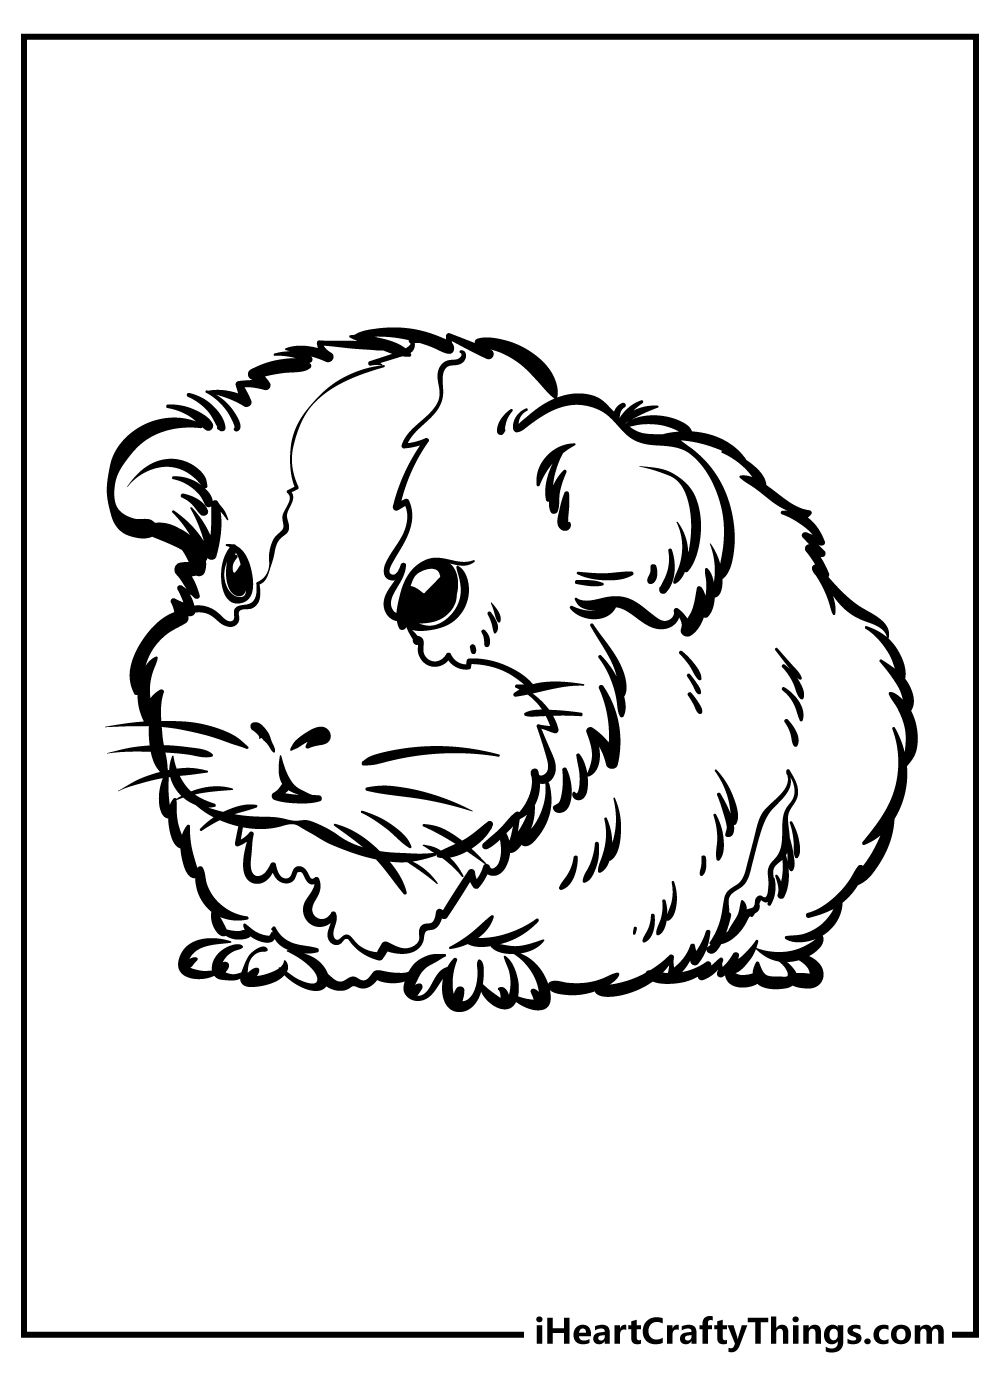 Guinea Pig Coloring Sheet for children free download